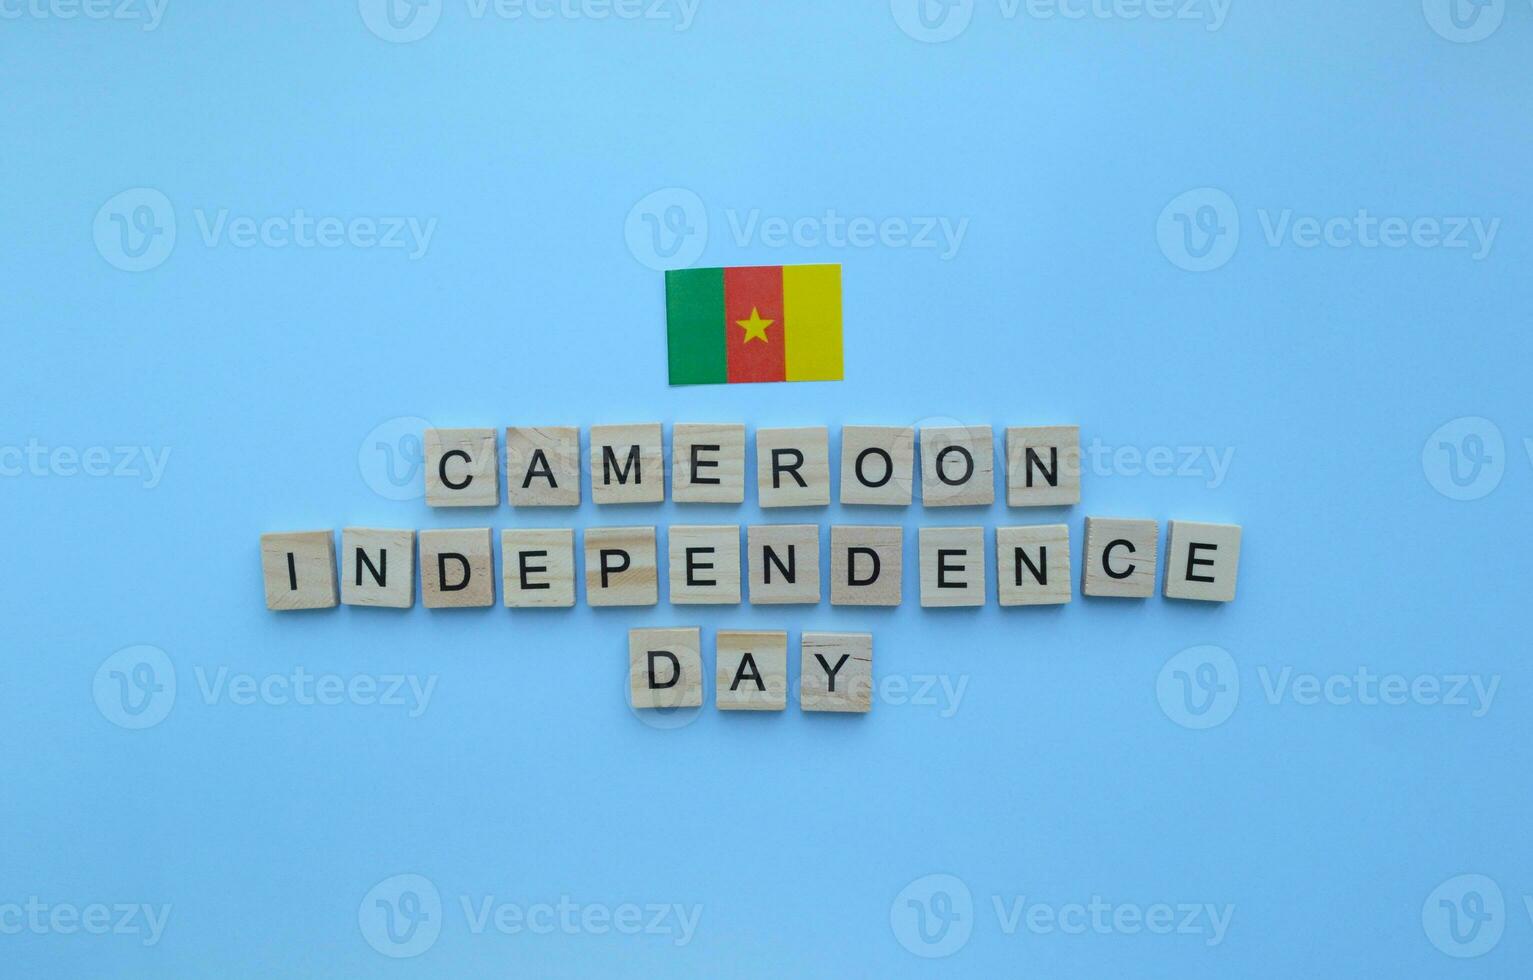 January 1, Independence Day in Cameroon, flag of Cameroon, minimalistic banner with wooden letters on a blue background photo